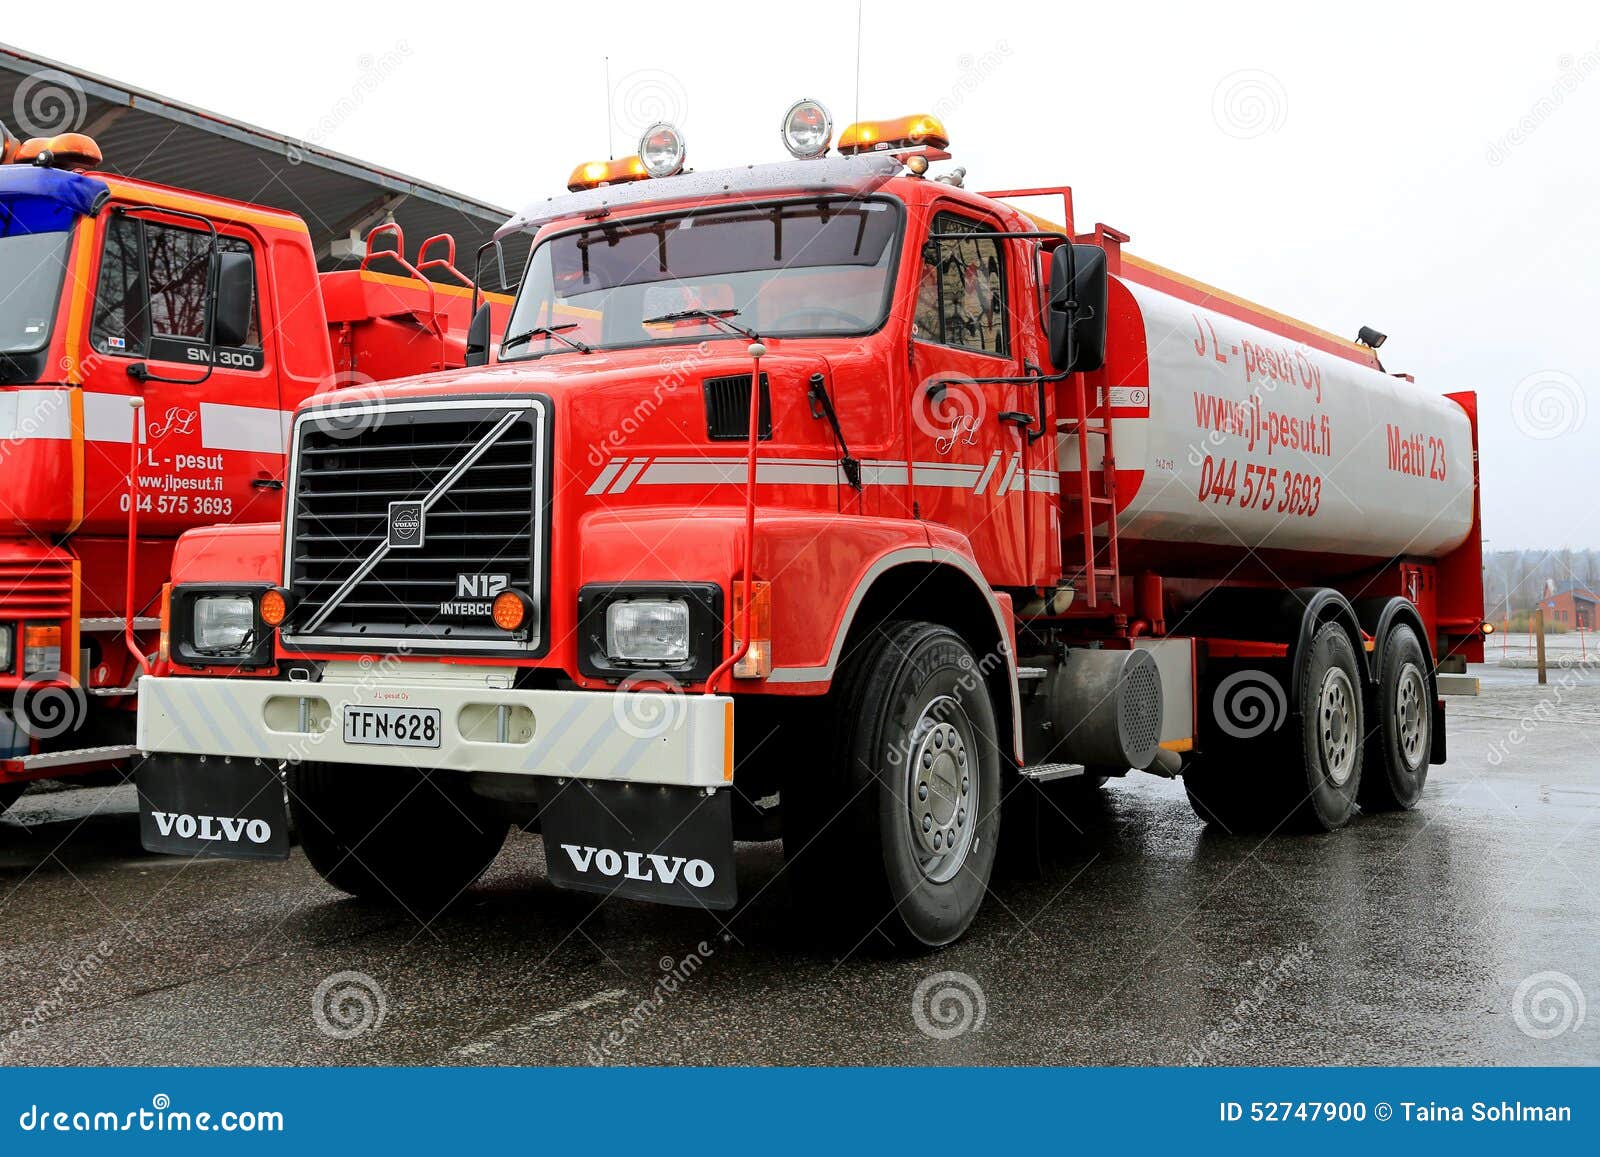 Red Volvo N12 Tank Truck Editorial Image - Image: 52747900